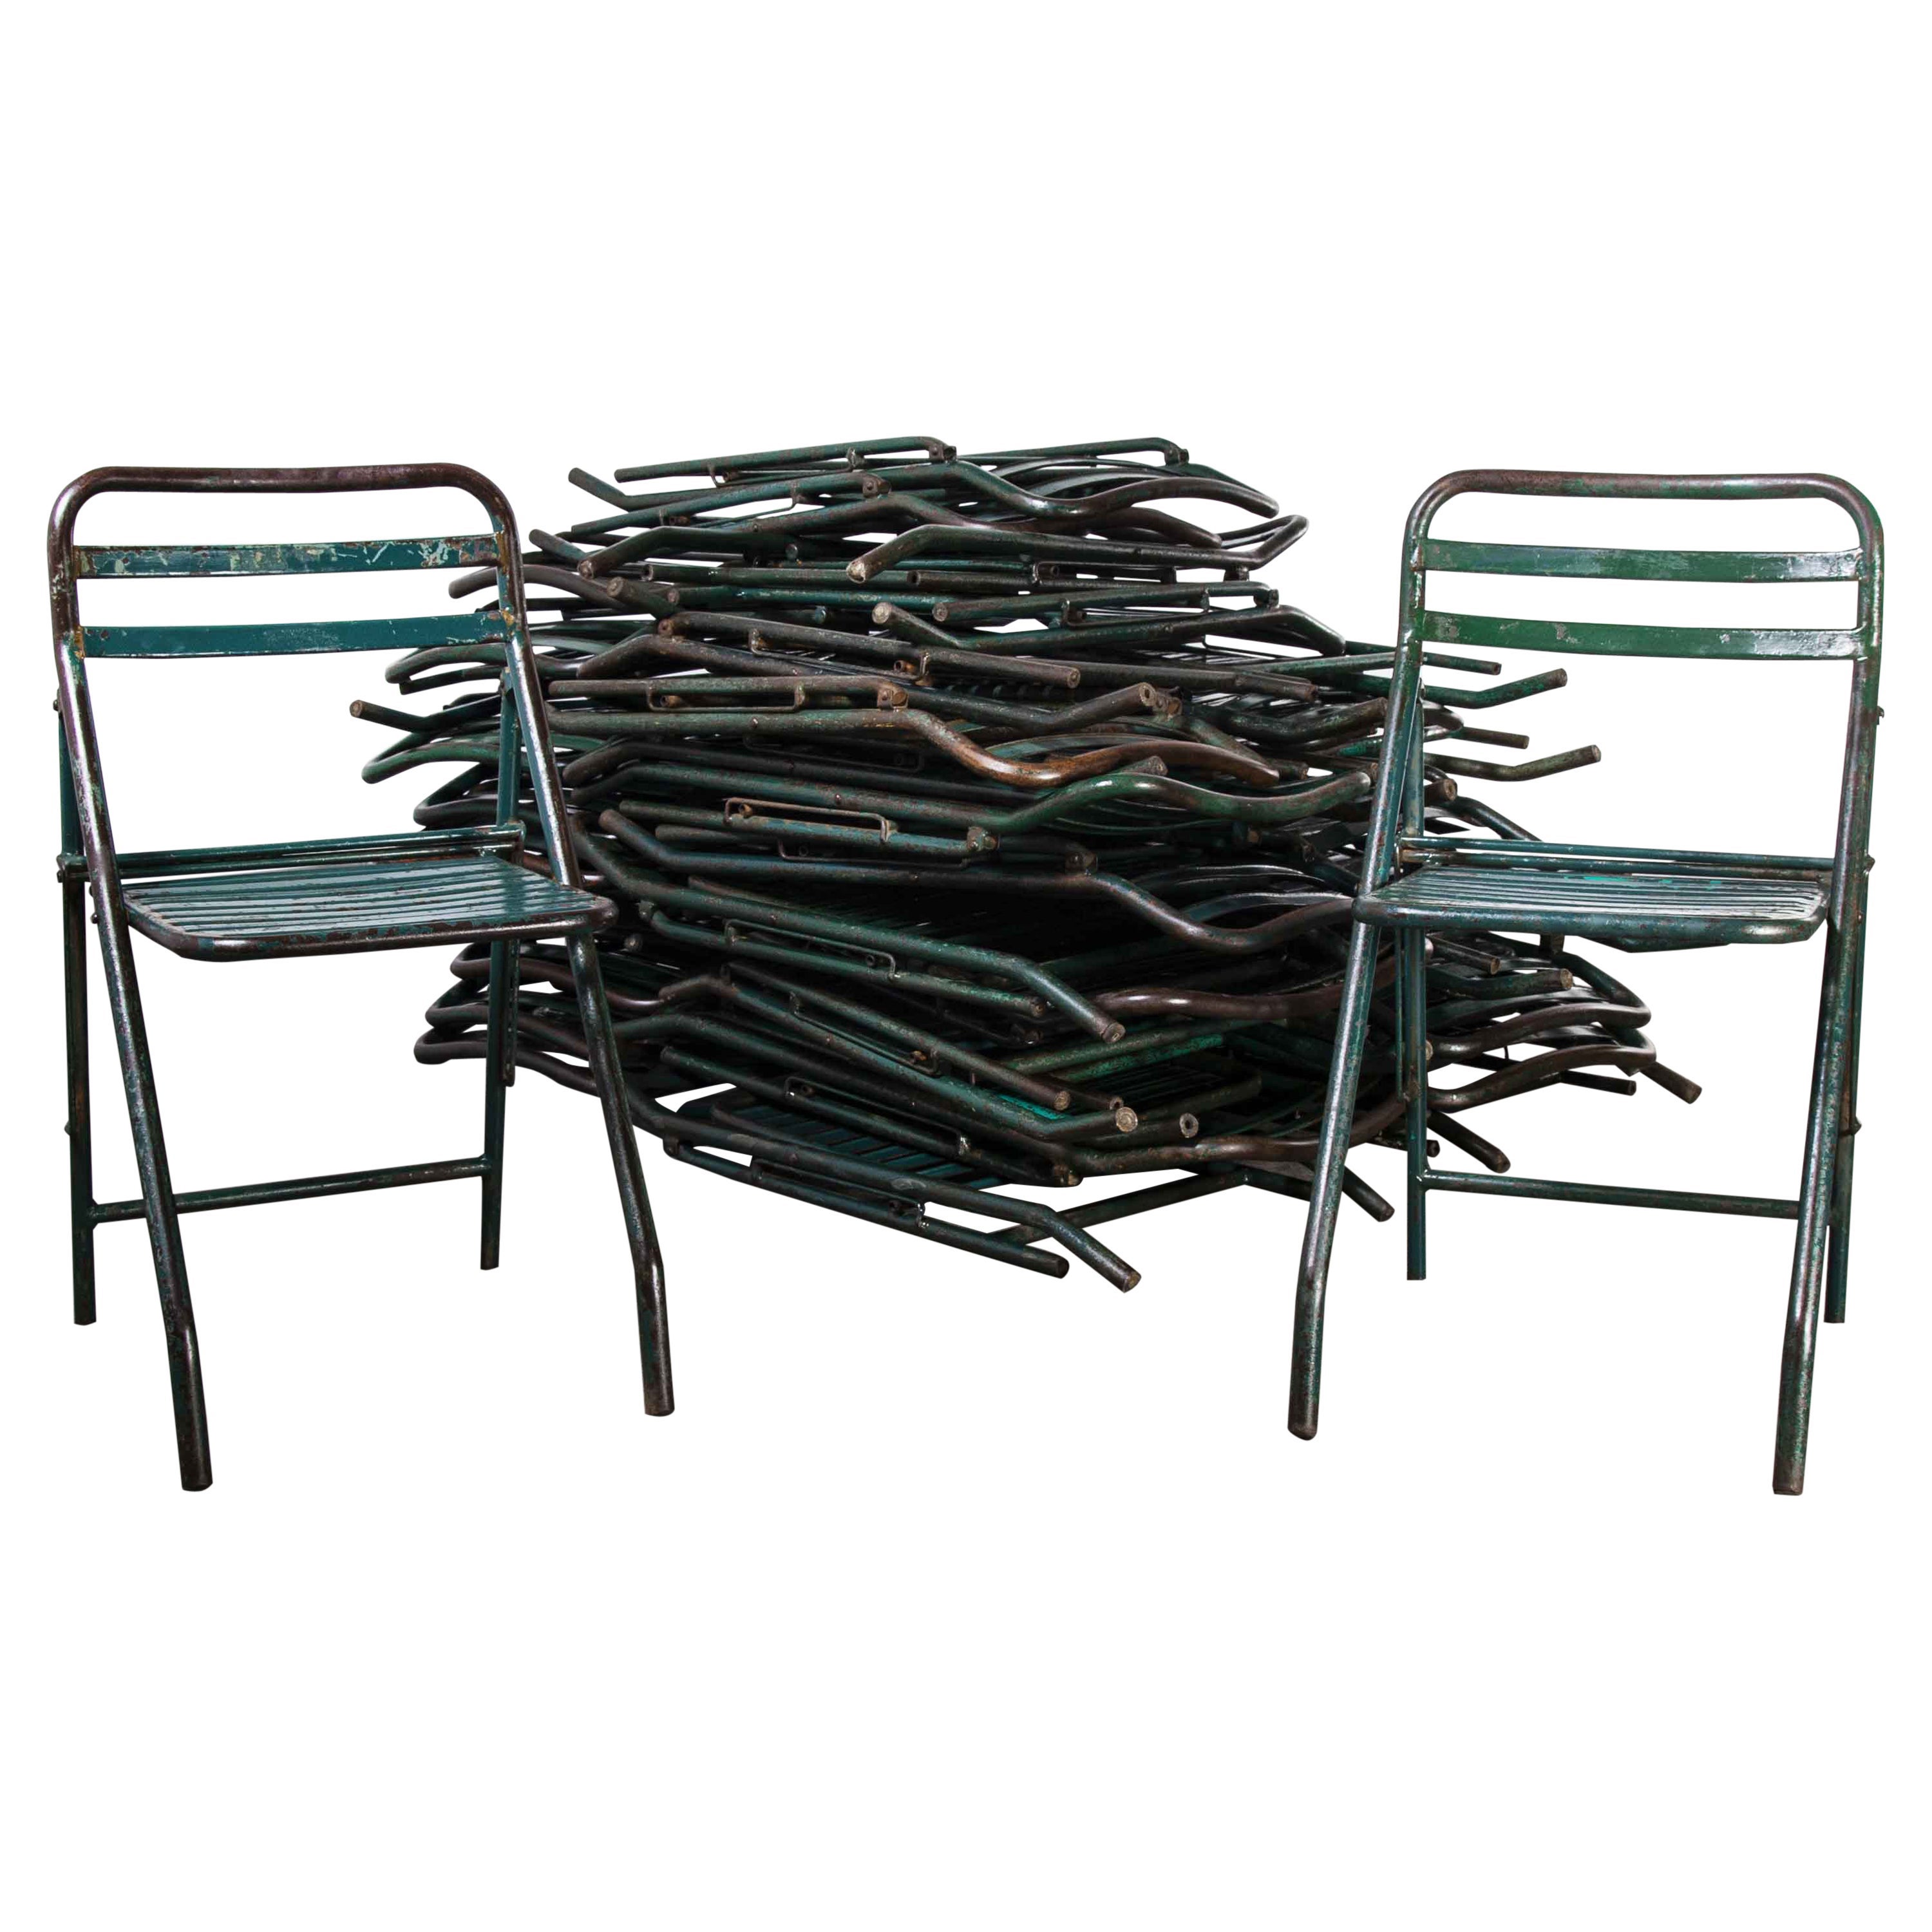 1960's, French Army Green Metal Folding Chairs, Various Quantities Available